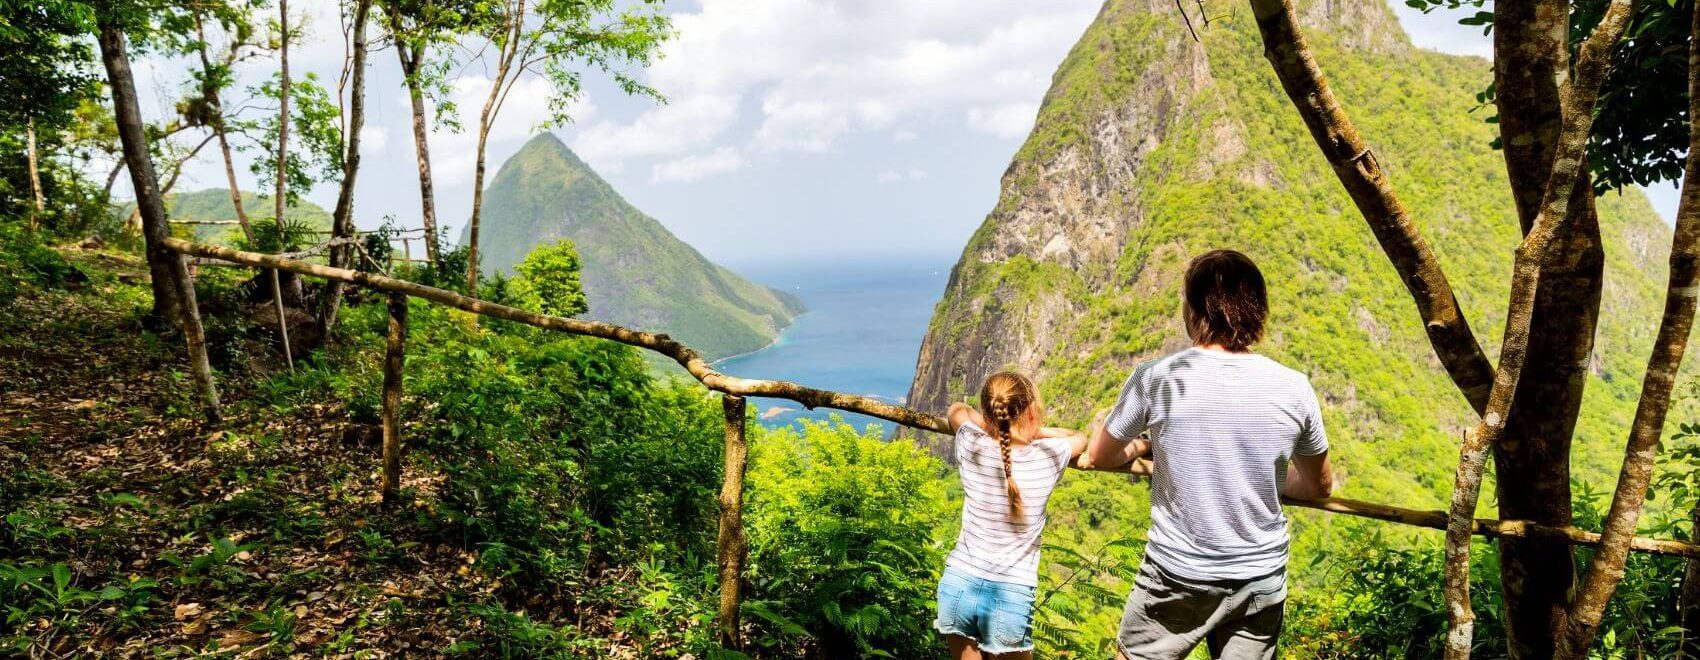 things-to-do-st-lucia-tet-paul-nature-trail